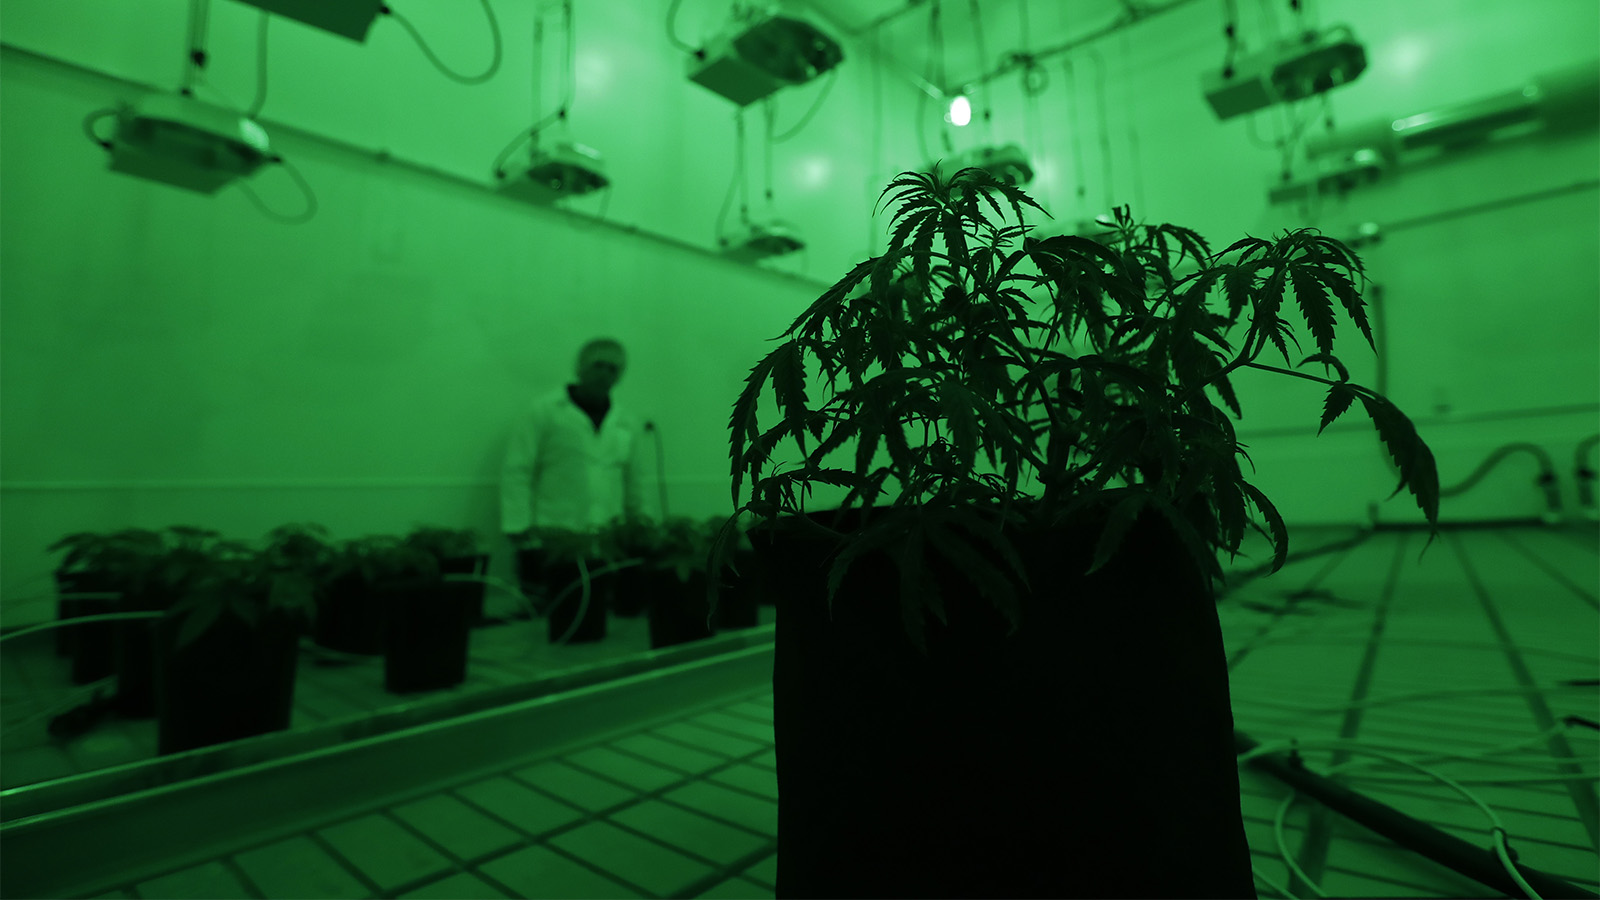 Marijuana plants grow under green lights to simulate night in a vegetation room at Compassionate Cultivation, a licensed medical cannabis cultivator and dispensary, on Dec. 14, 2017, in Manchaca, Texas.(AP Photo/Eric Gay)